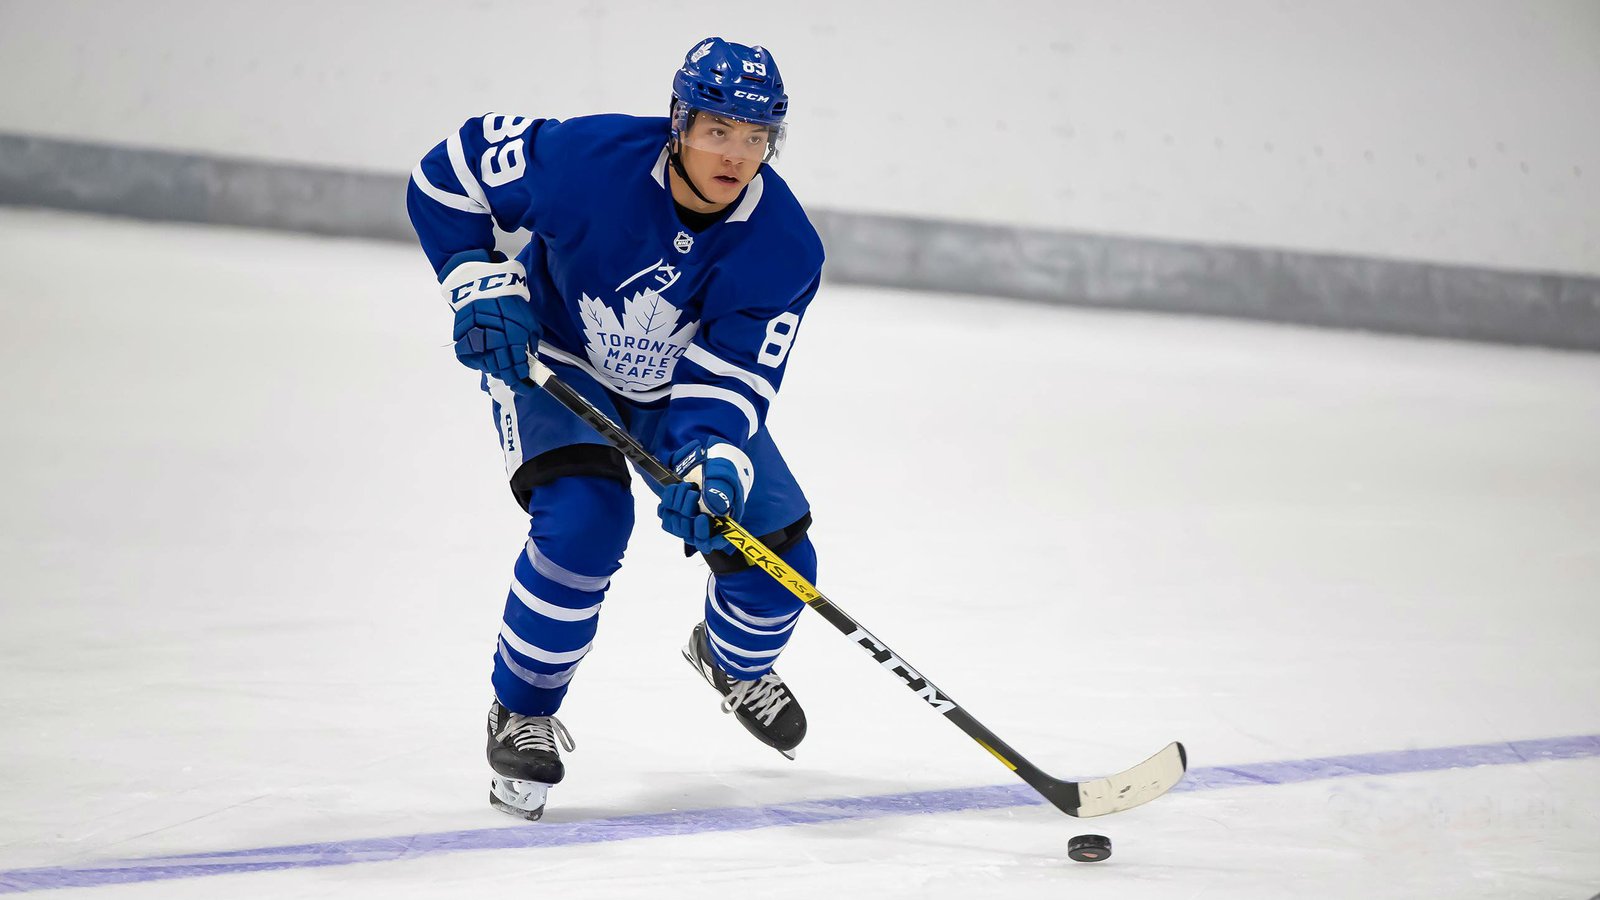 Leafs rookie set to make his NHL debut in Game 1.